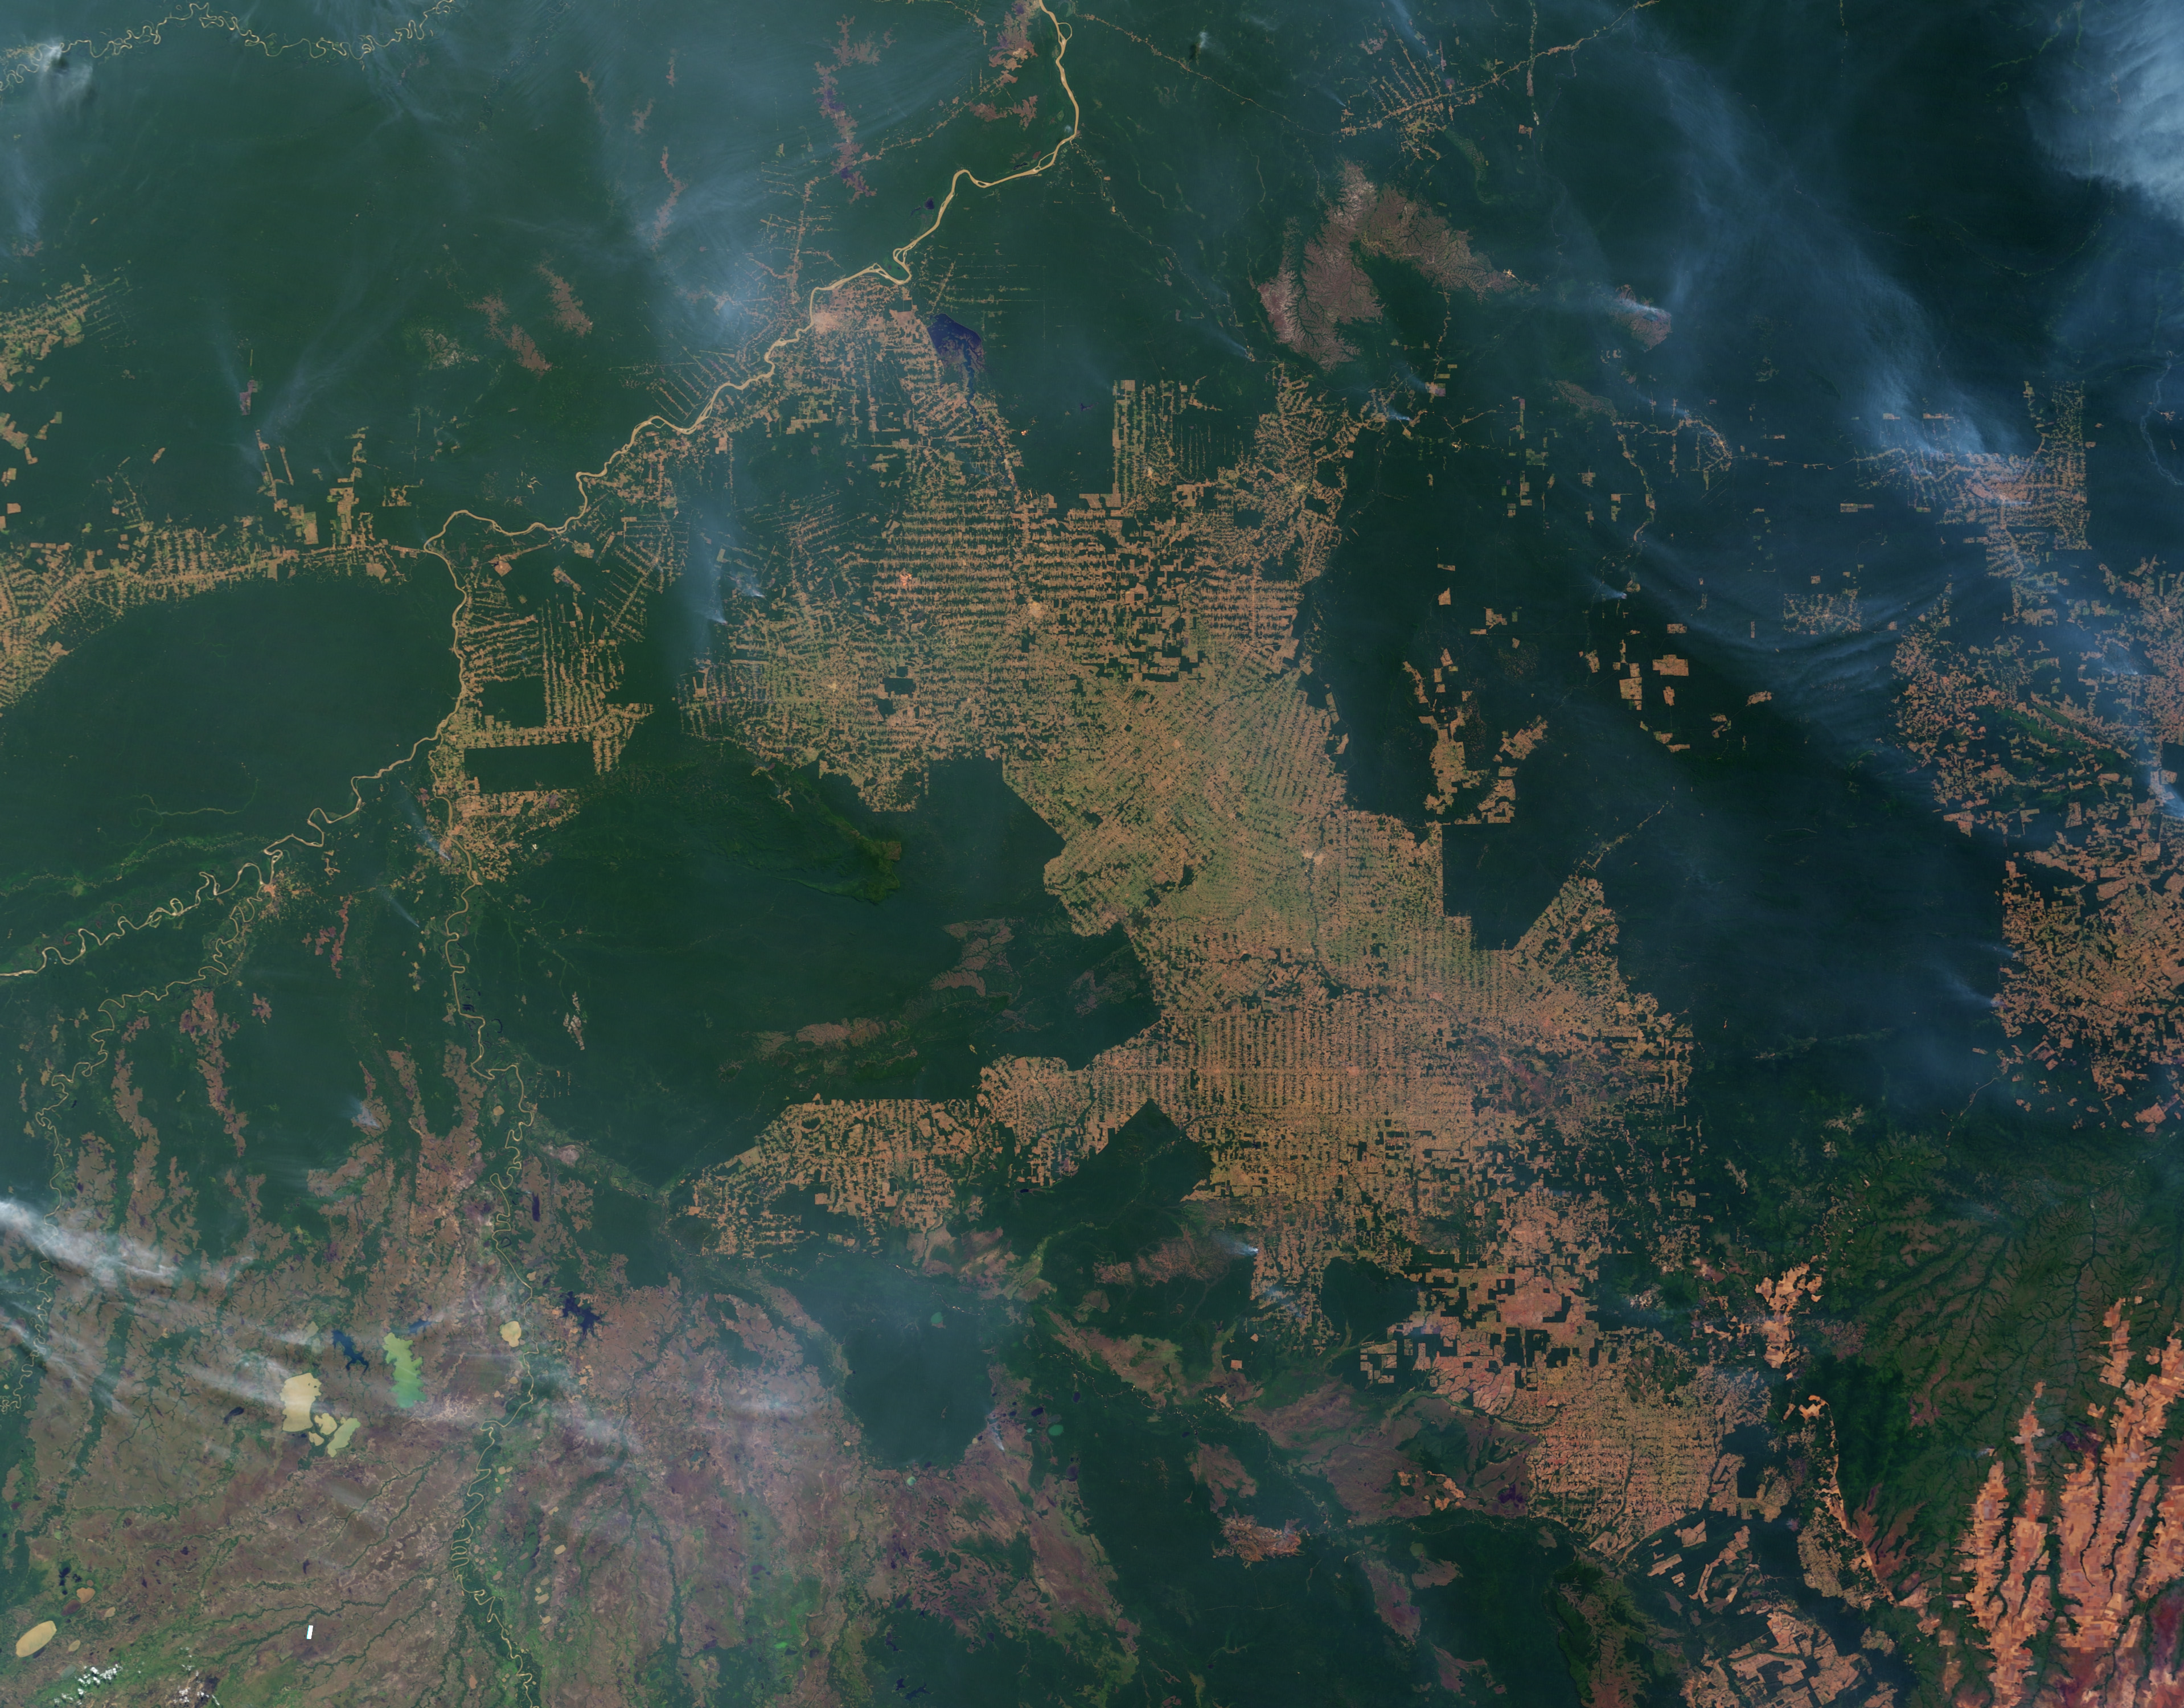 Fires and Deforestation on the Amazon Frontier, Rondonia, Brazil - related image preview